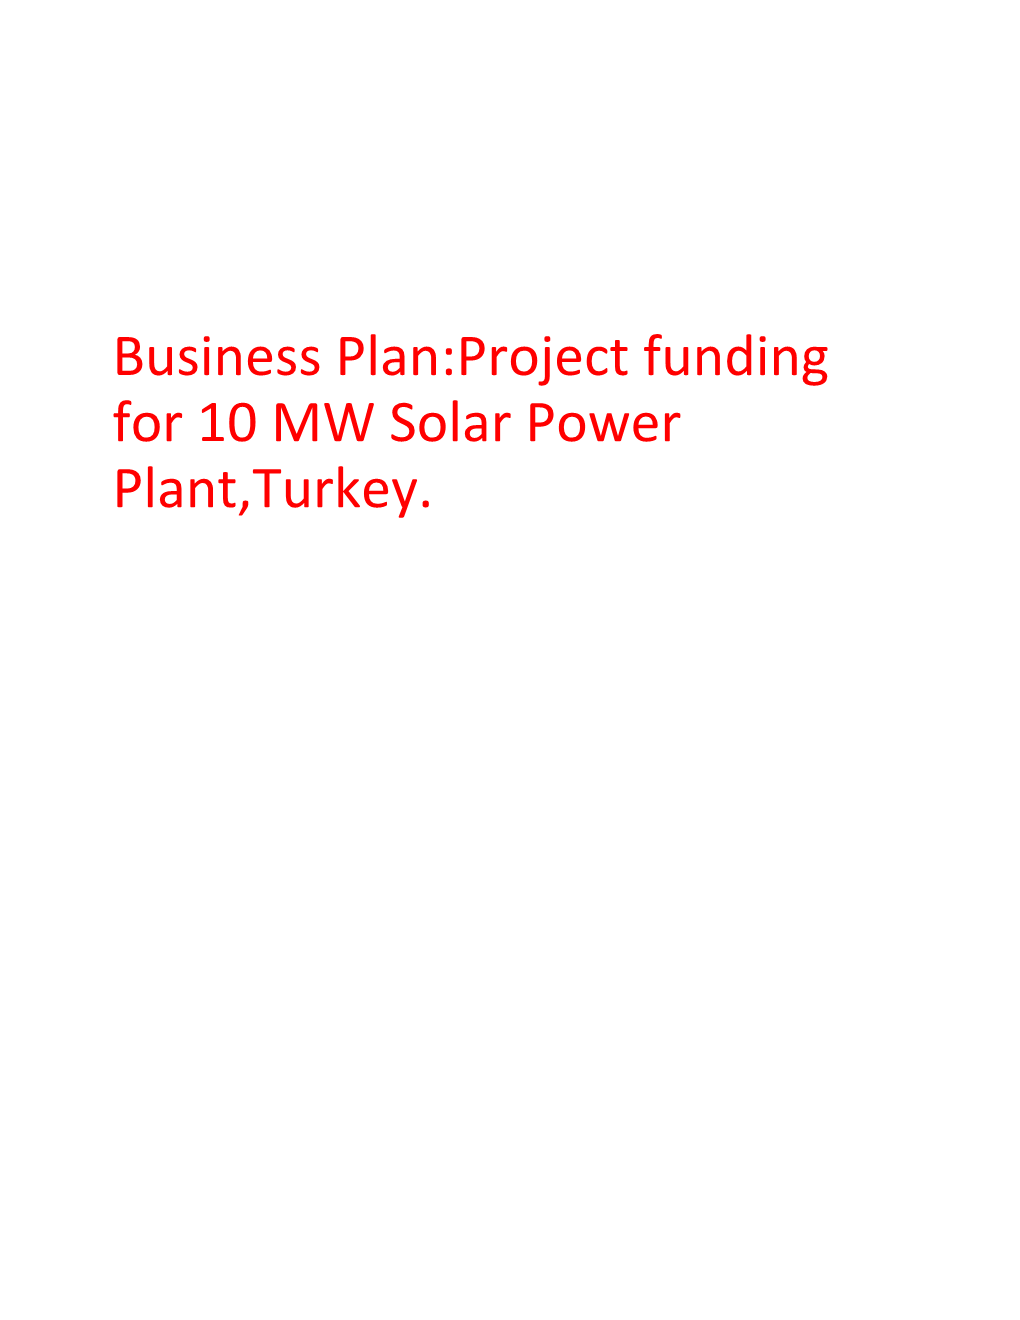 Business Plan:Project Funding for 10 MW Solar Power Plant,Turkey